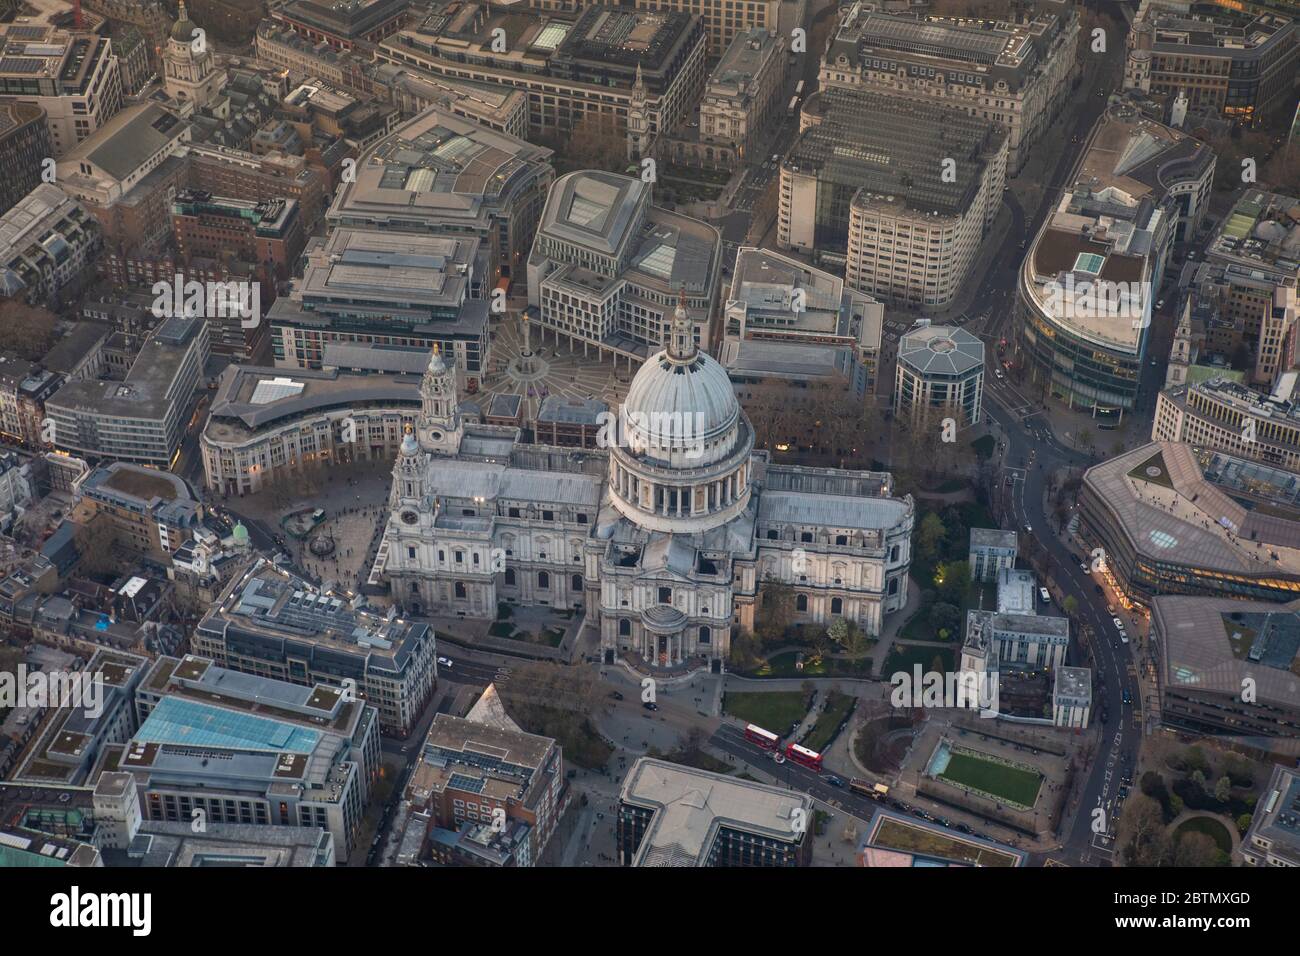 Aerial View of St Paul's Cathedral in London at Dusk Stock Photo